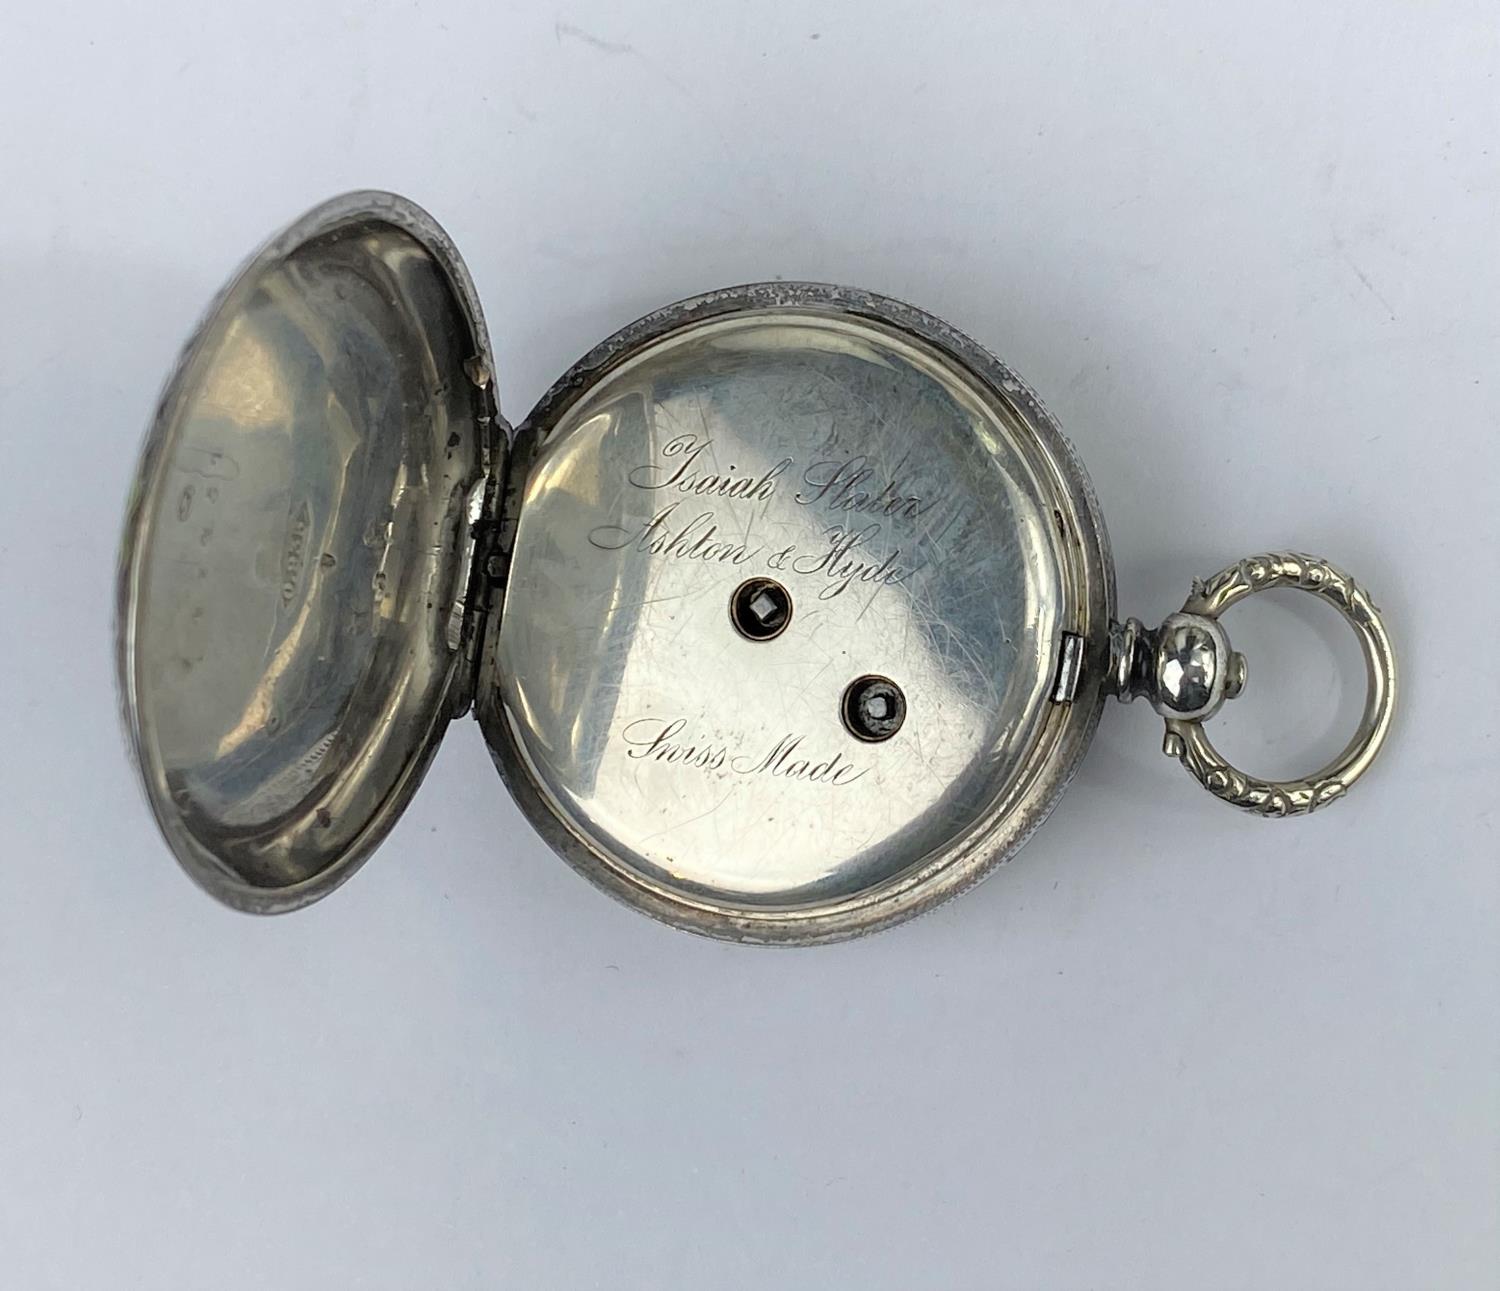 A continental silver cased fob watch with enamelled dial, inscribed Isaiah Slater, Ashton & Hyde - Image 3 of 3